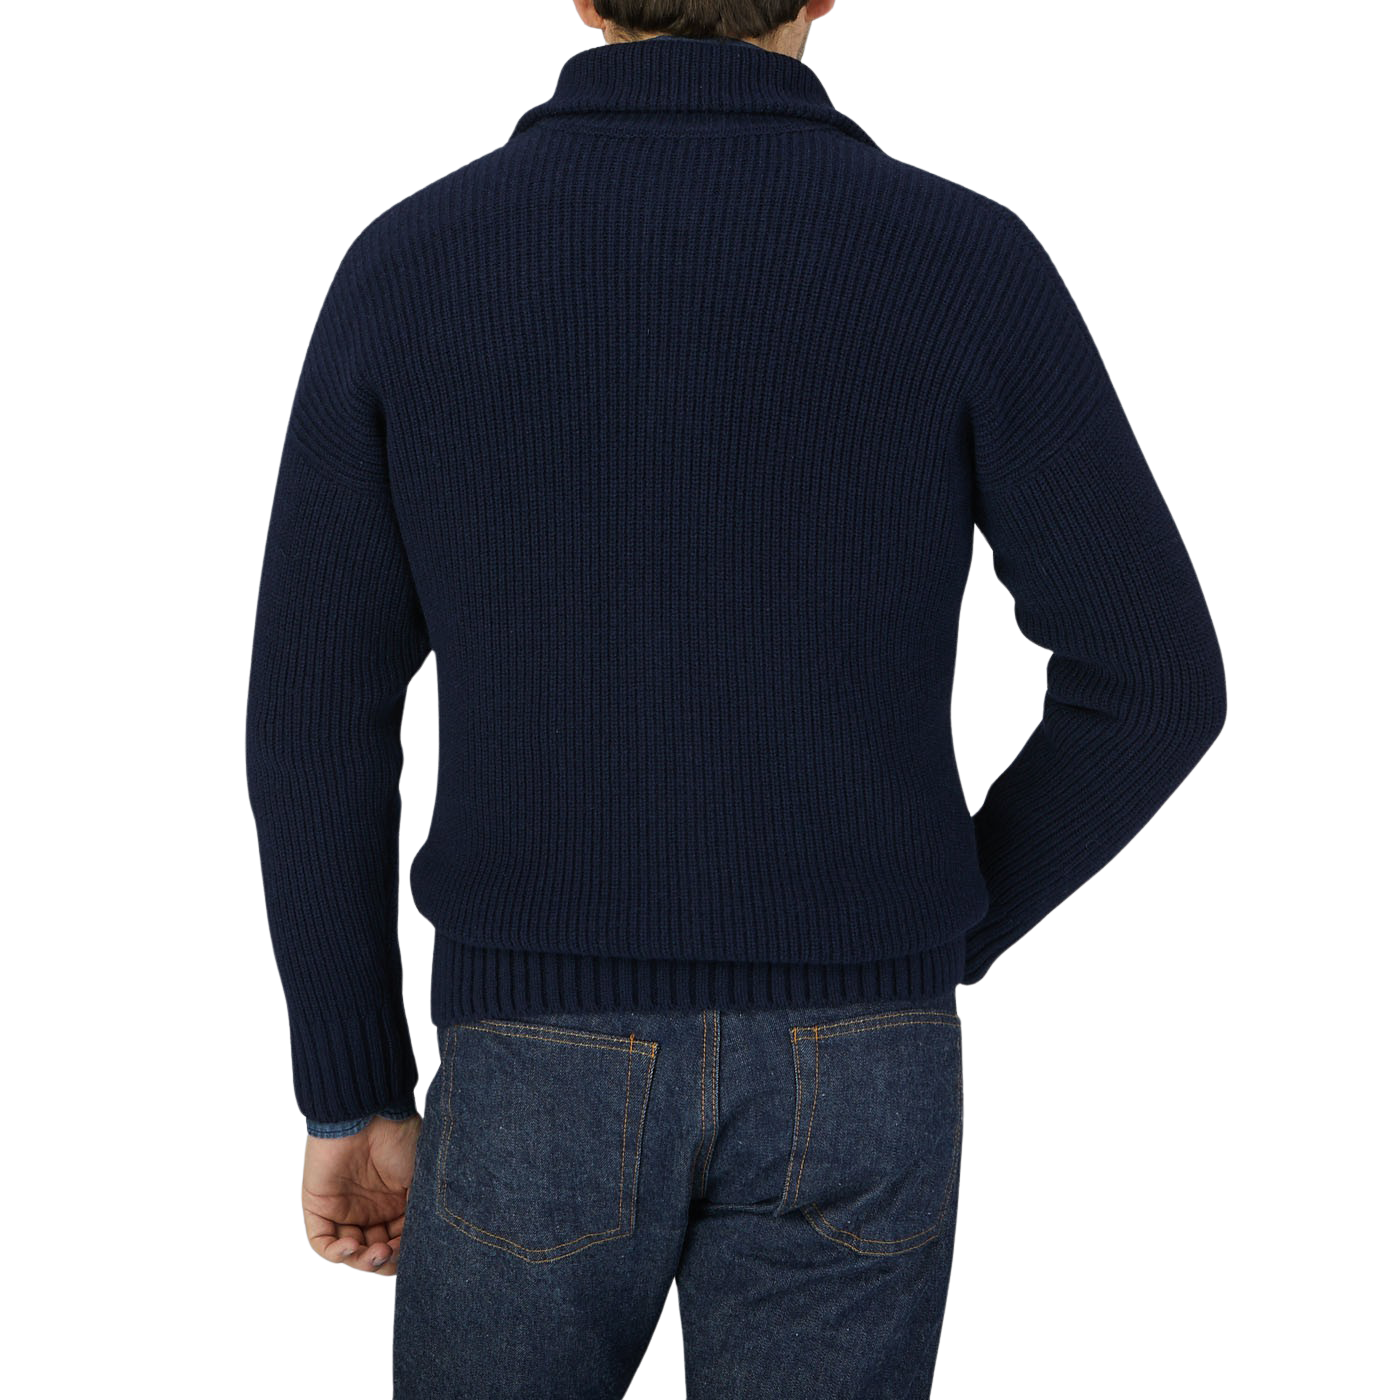 The back view of a man wearing a Gran Sasso Navy Blue Eco Cashmere Funnel Neck Cardigan.